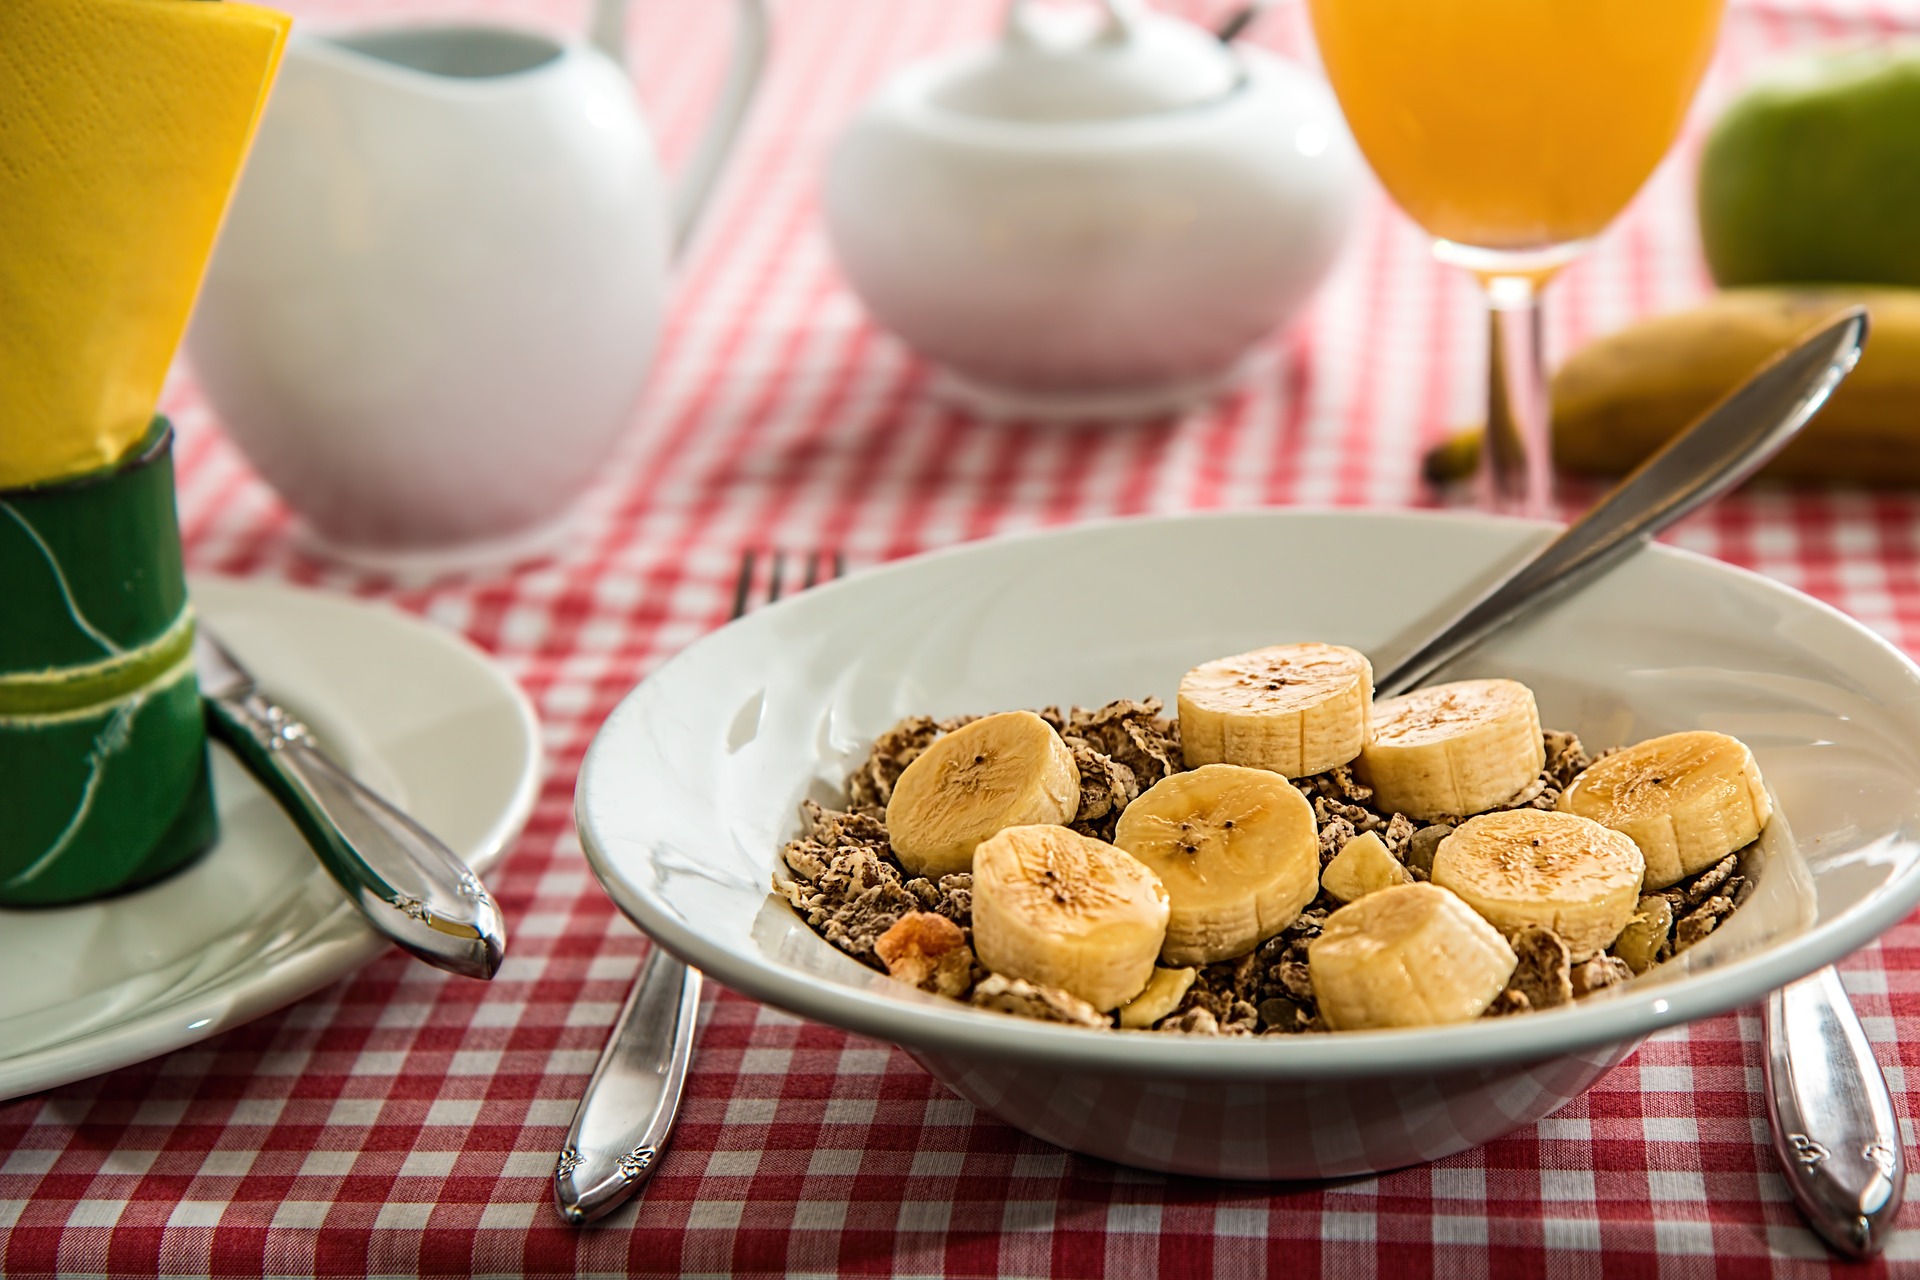 Bowl of wholegrain cereal with fruit